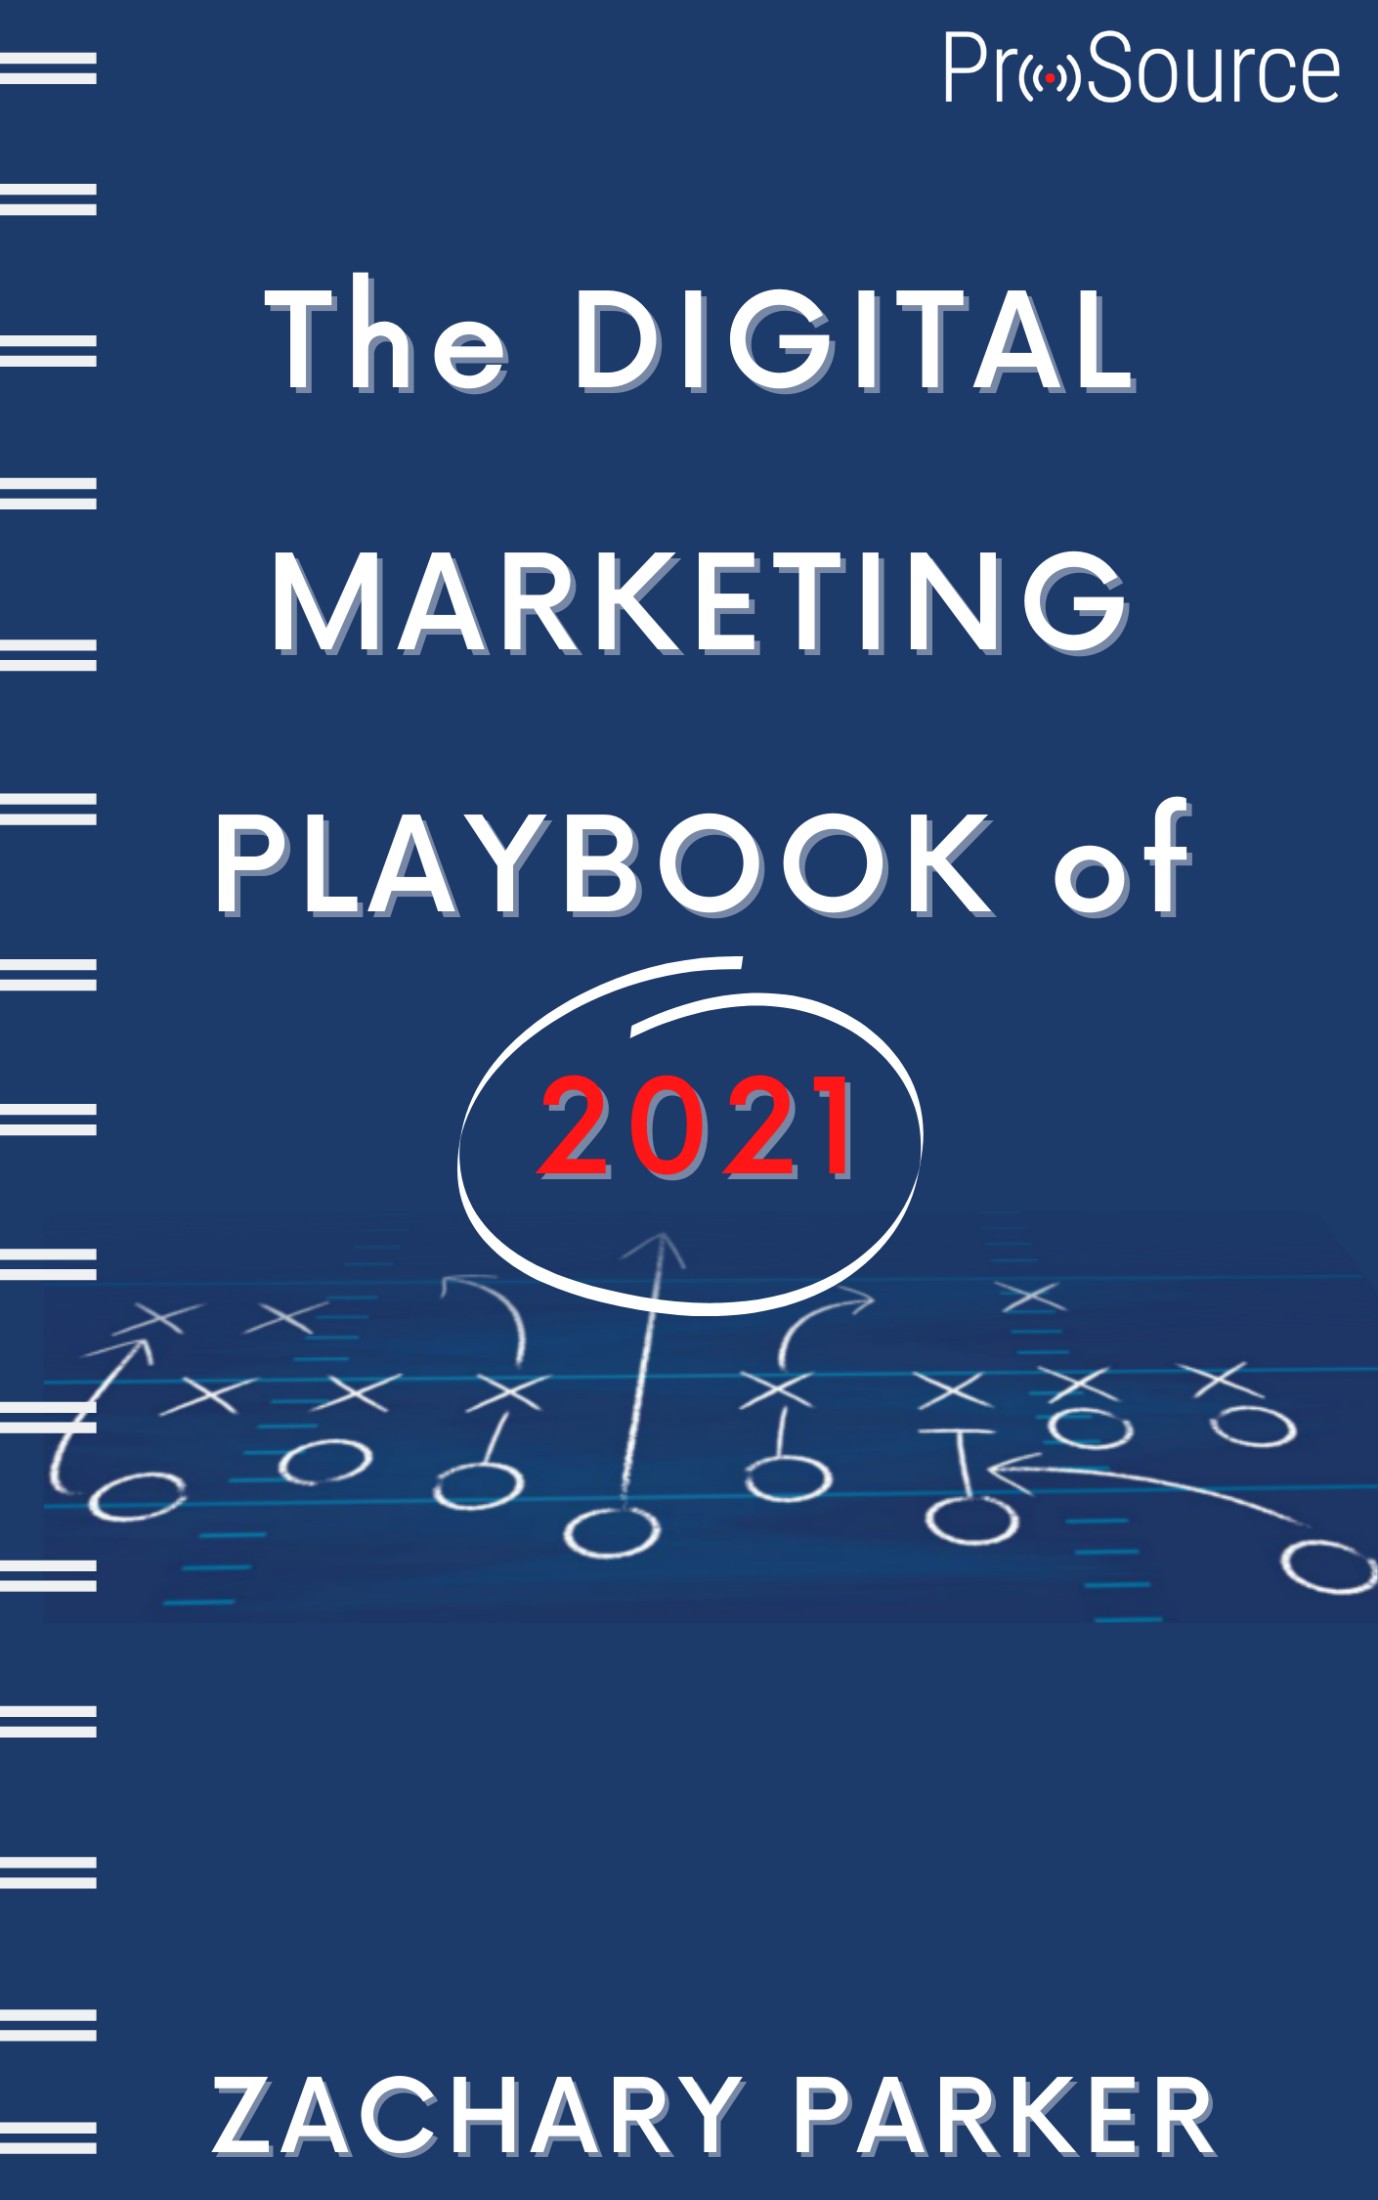 subscribe for free marketing ebook